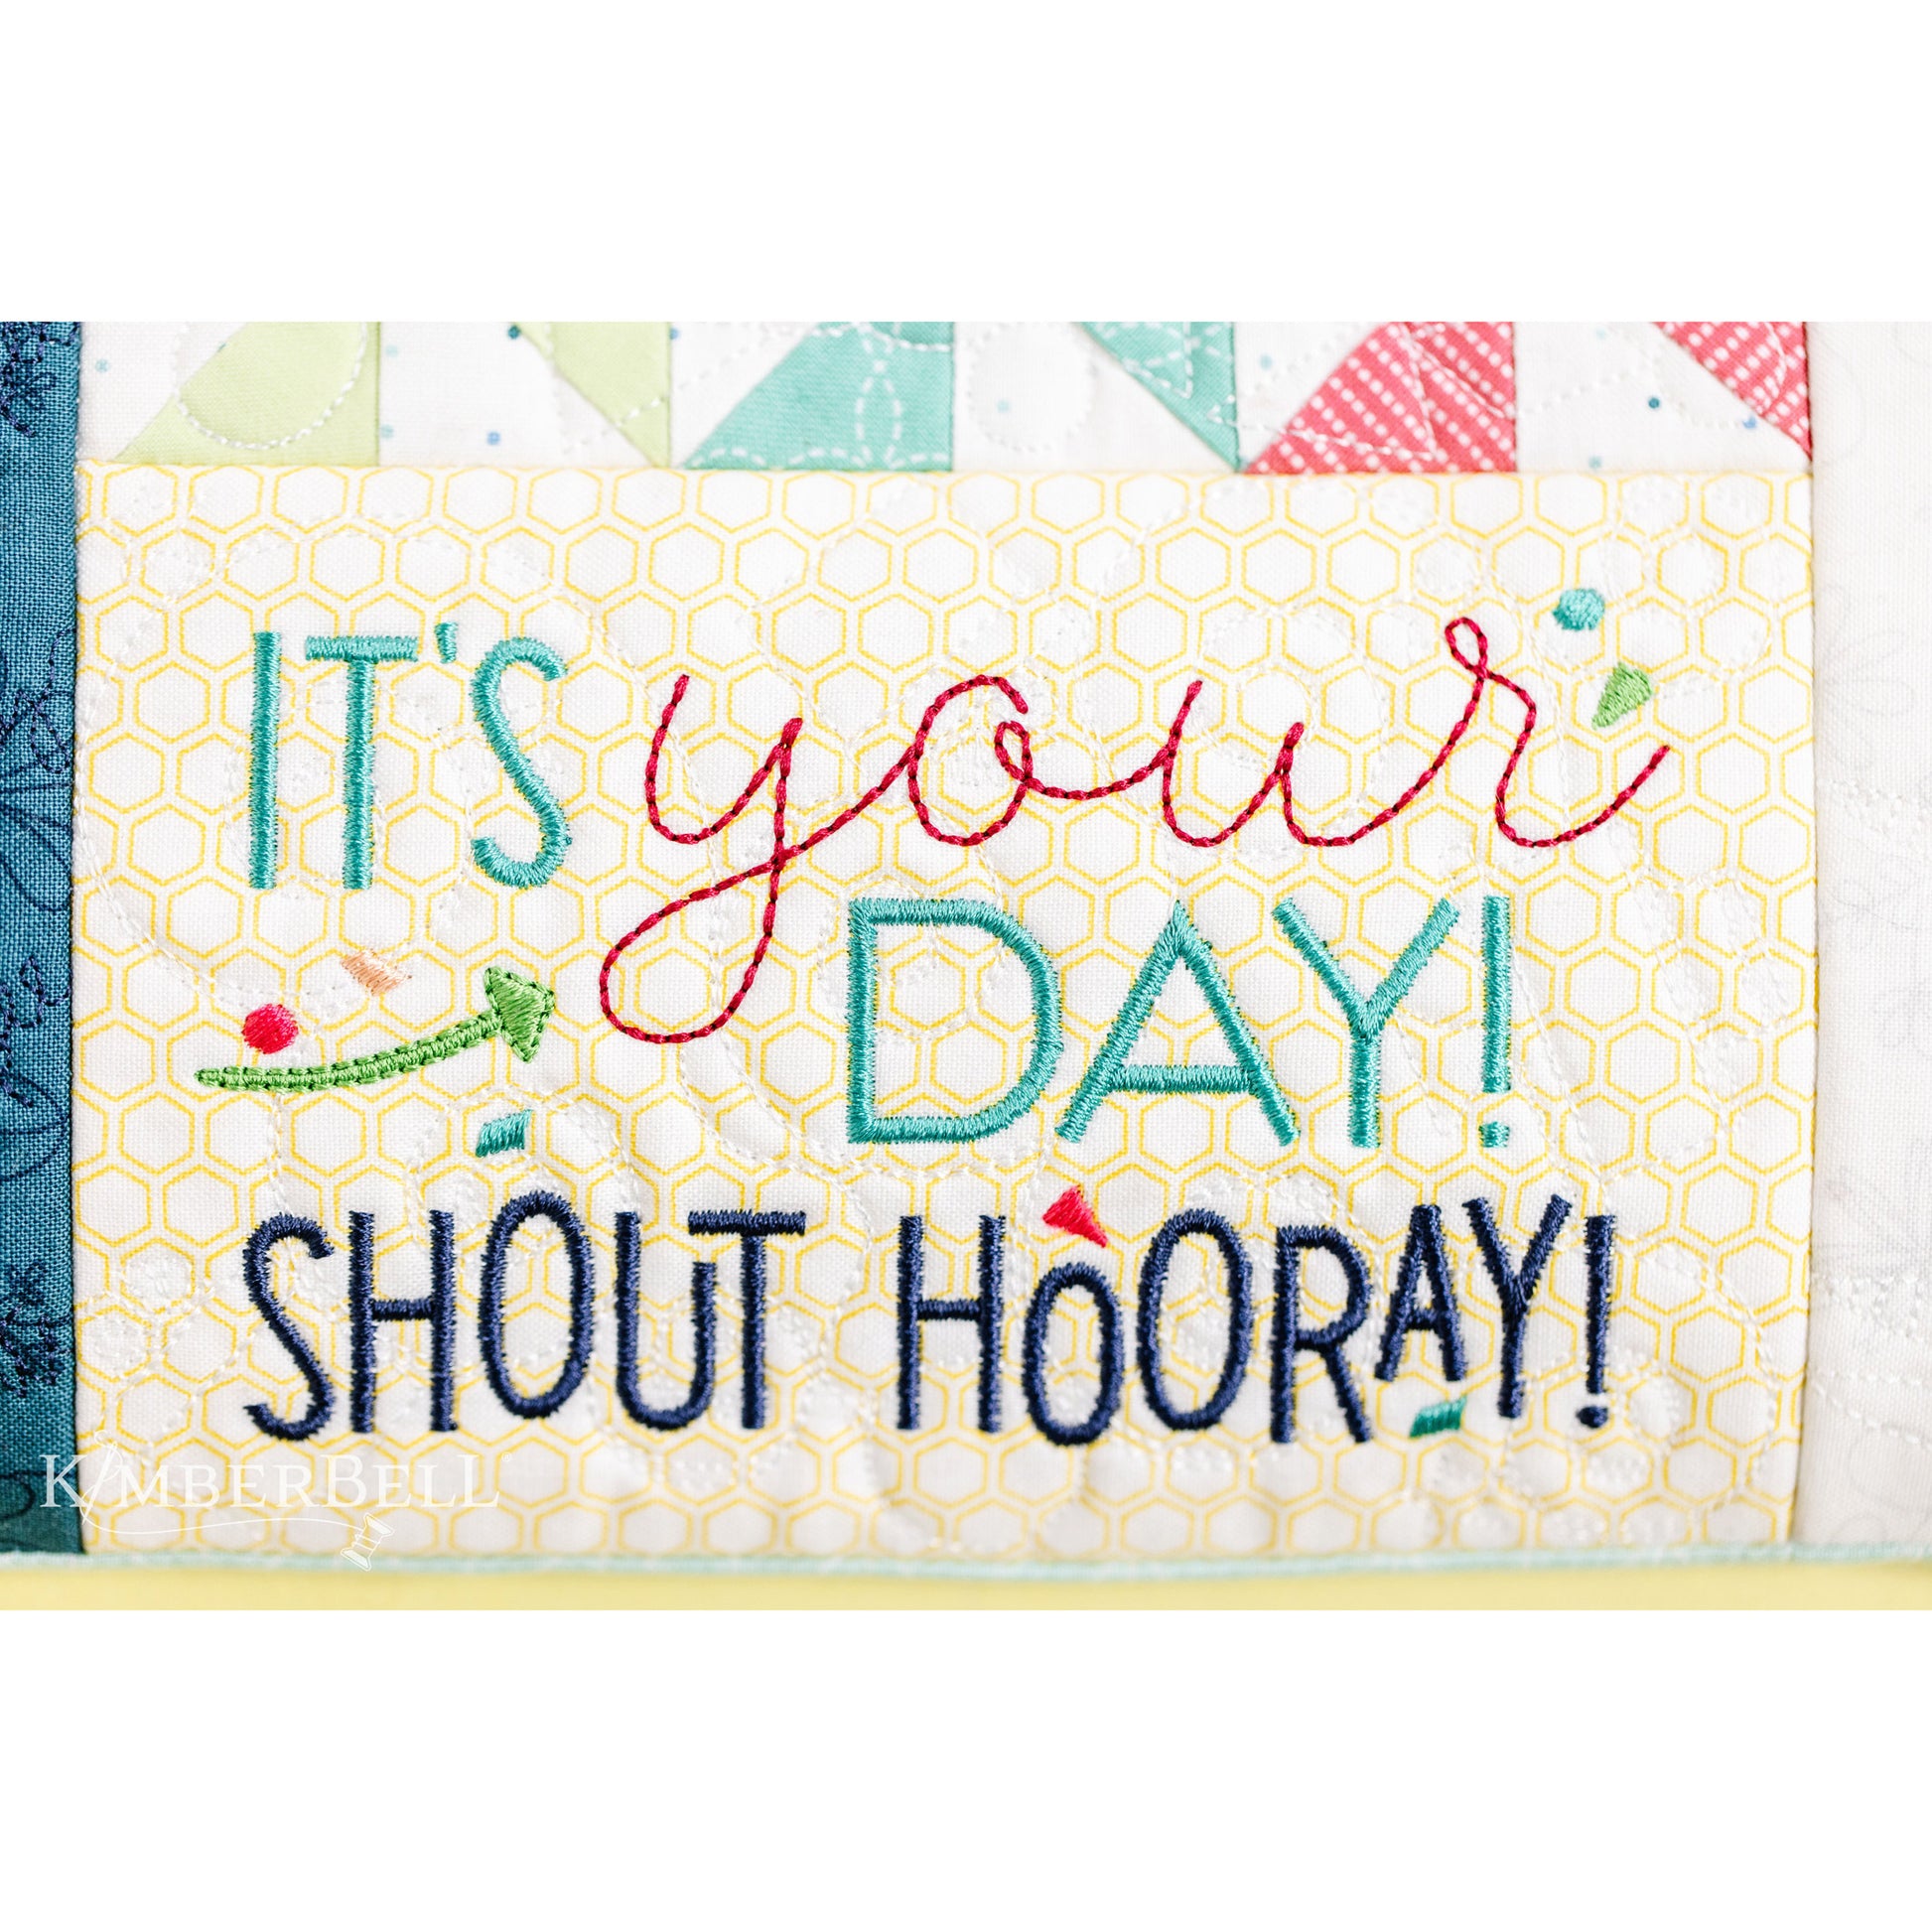 Kimberbell’s Shout Hooray! Bench Pillow Pattern (KD5120) celebrates the people you love with confetti, cake, and more! Stitch names, dates, and greetings with the included alphabet and sentiments, then feature your message in the letterboard panel. Image shows the "Shout Hooray" finished block.